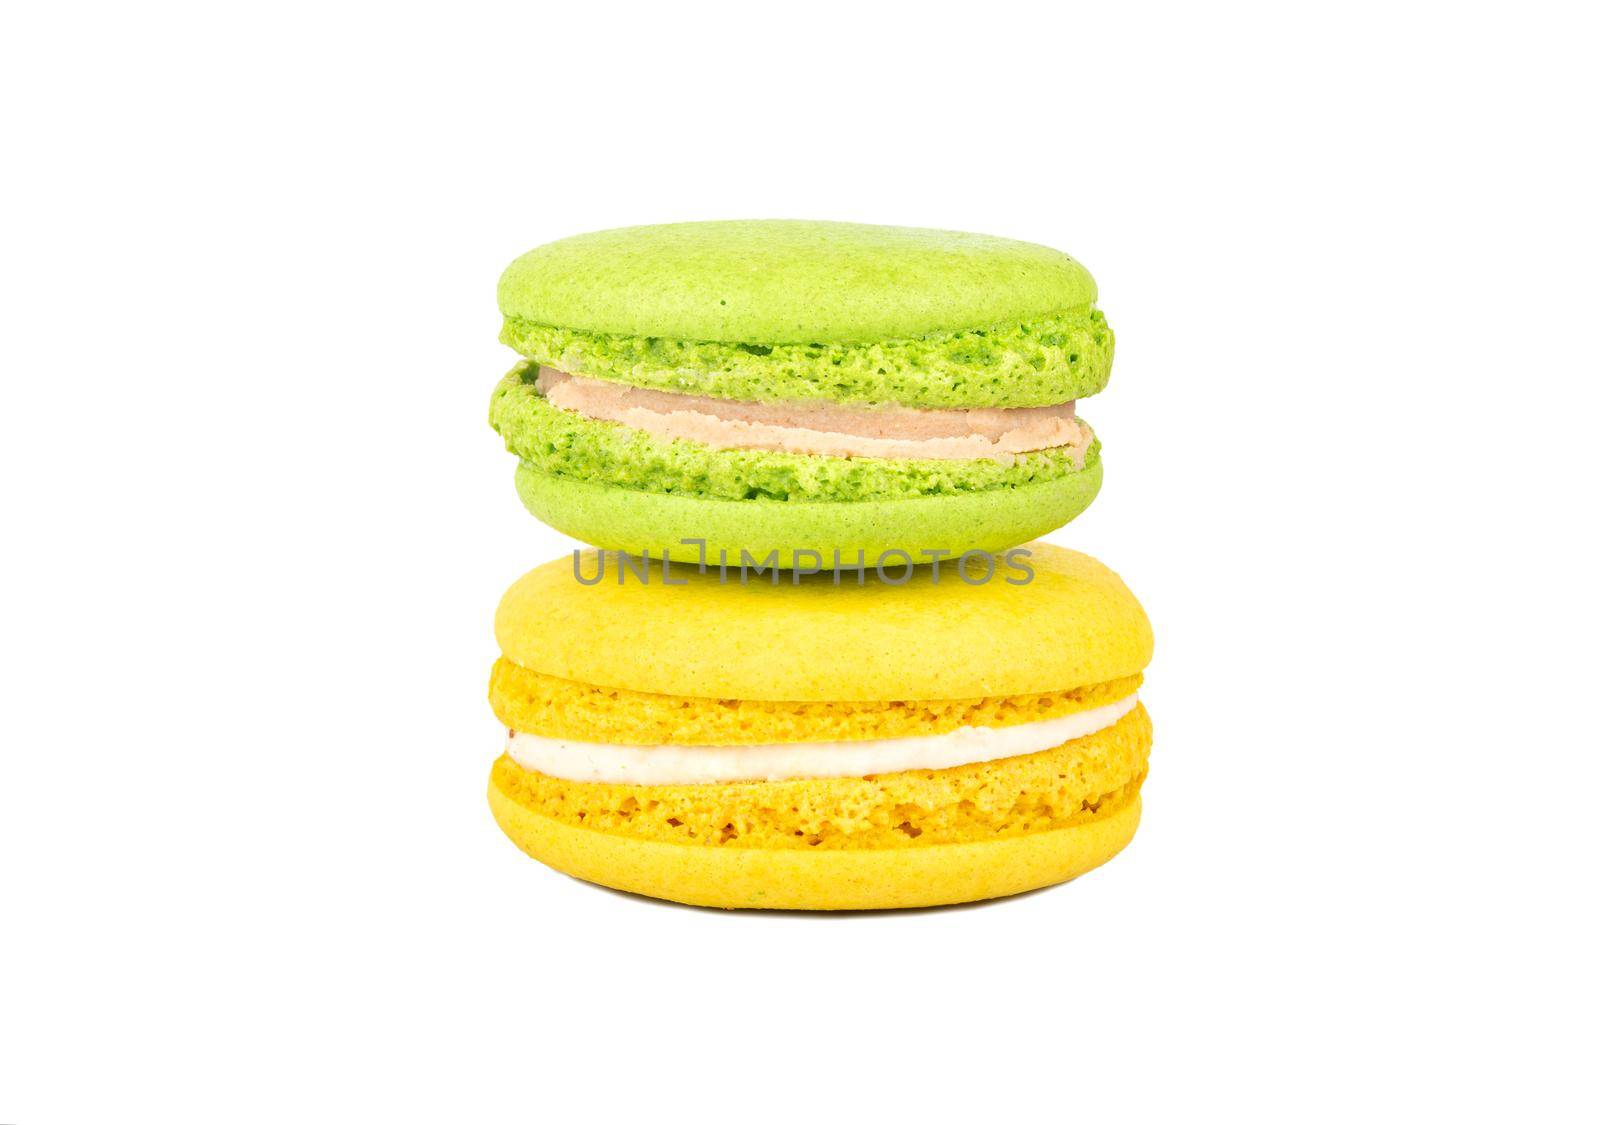 Pistachio and lemon macaroons by andregric